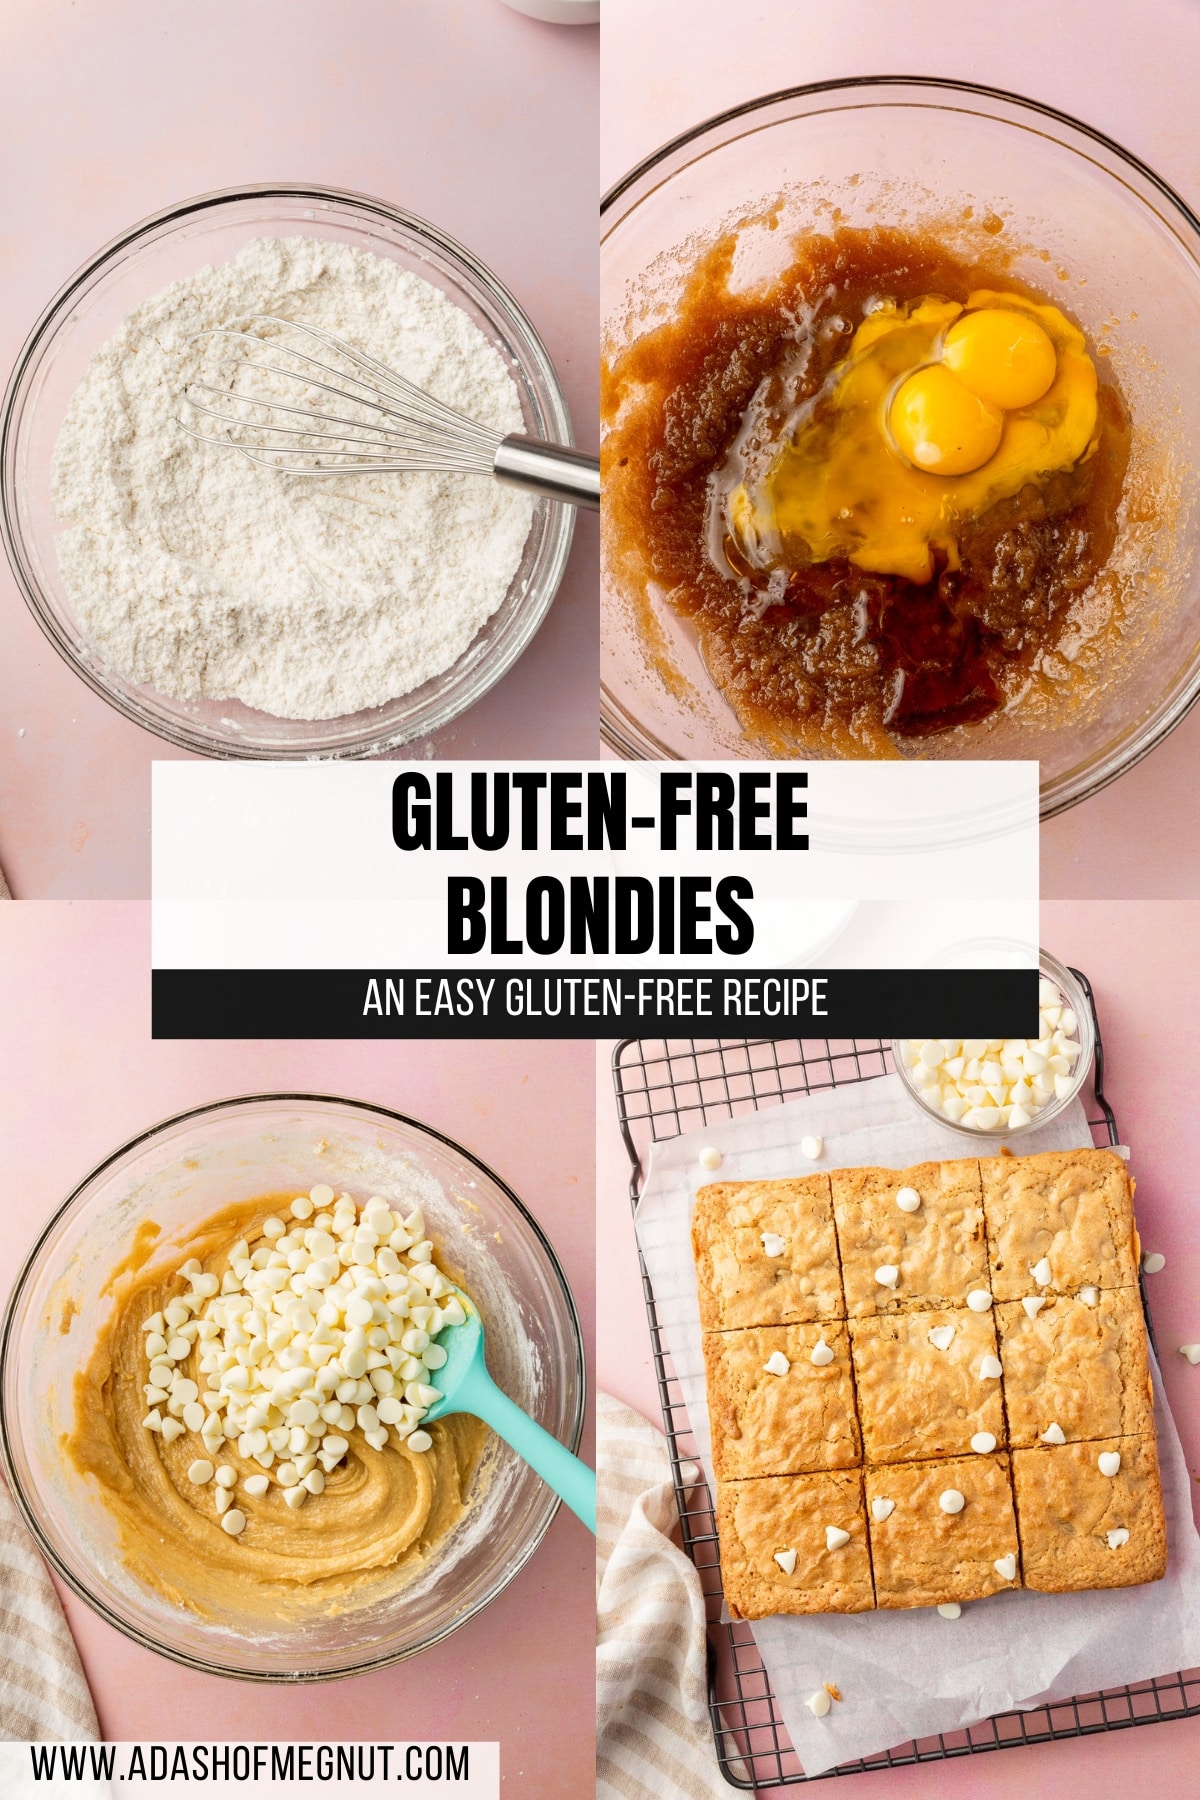 A four photo collage showing the process of making gluten-free blondies from scratch. Photo 1: A glass mixing bowl with gluten-free flour and a whisk in it. Photo 2: A glass mixing bowl with a melted butter and brown sugar mixture topped with two eggs and vanilla extract. Photo 3: A glass mixing bowl filled with gluten-free blondie batter topped with a pile of white chocolate chips. Photo 4: Gluten-free blondies cut into 9 equal squares cooling on a wire rack topped with parchment paper.